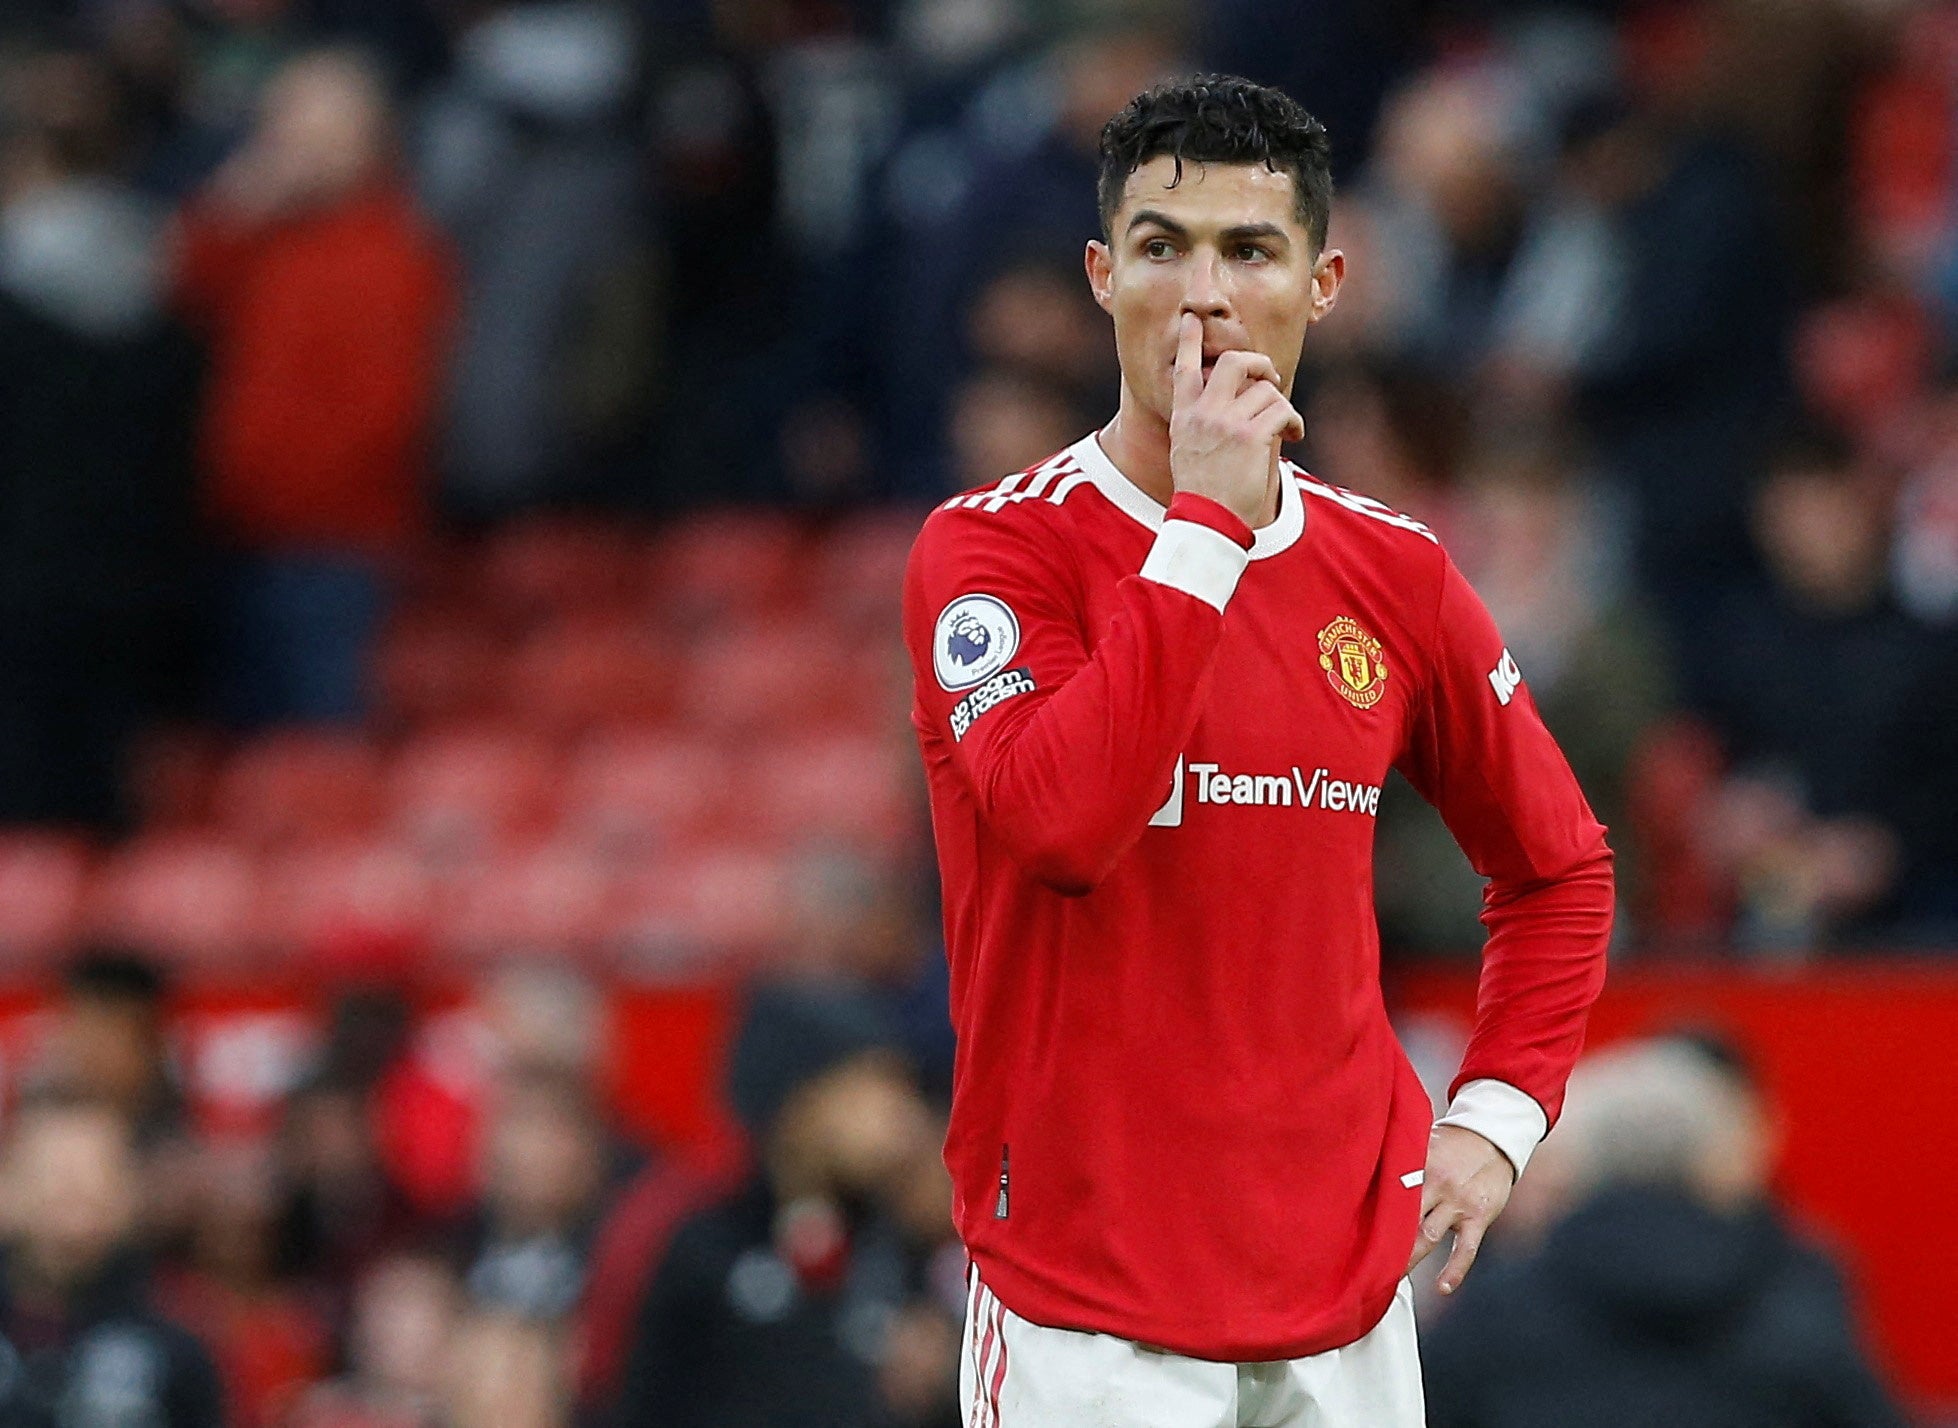 Cristiano Ronaldo was omitted from United’s squad to face City